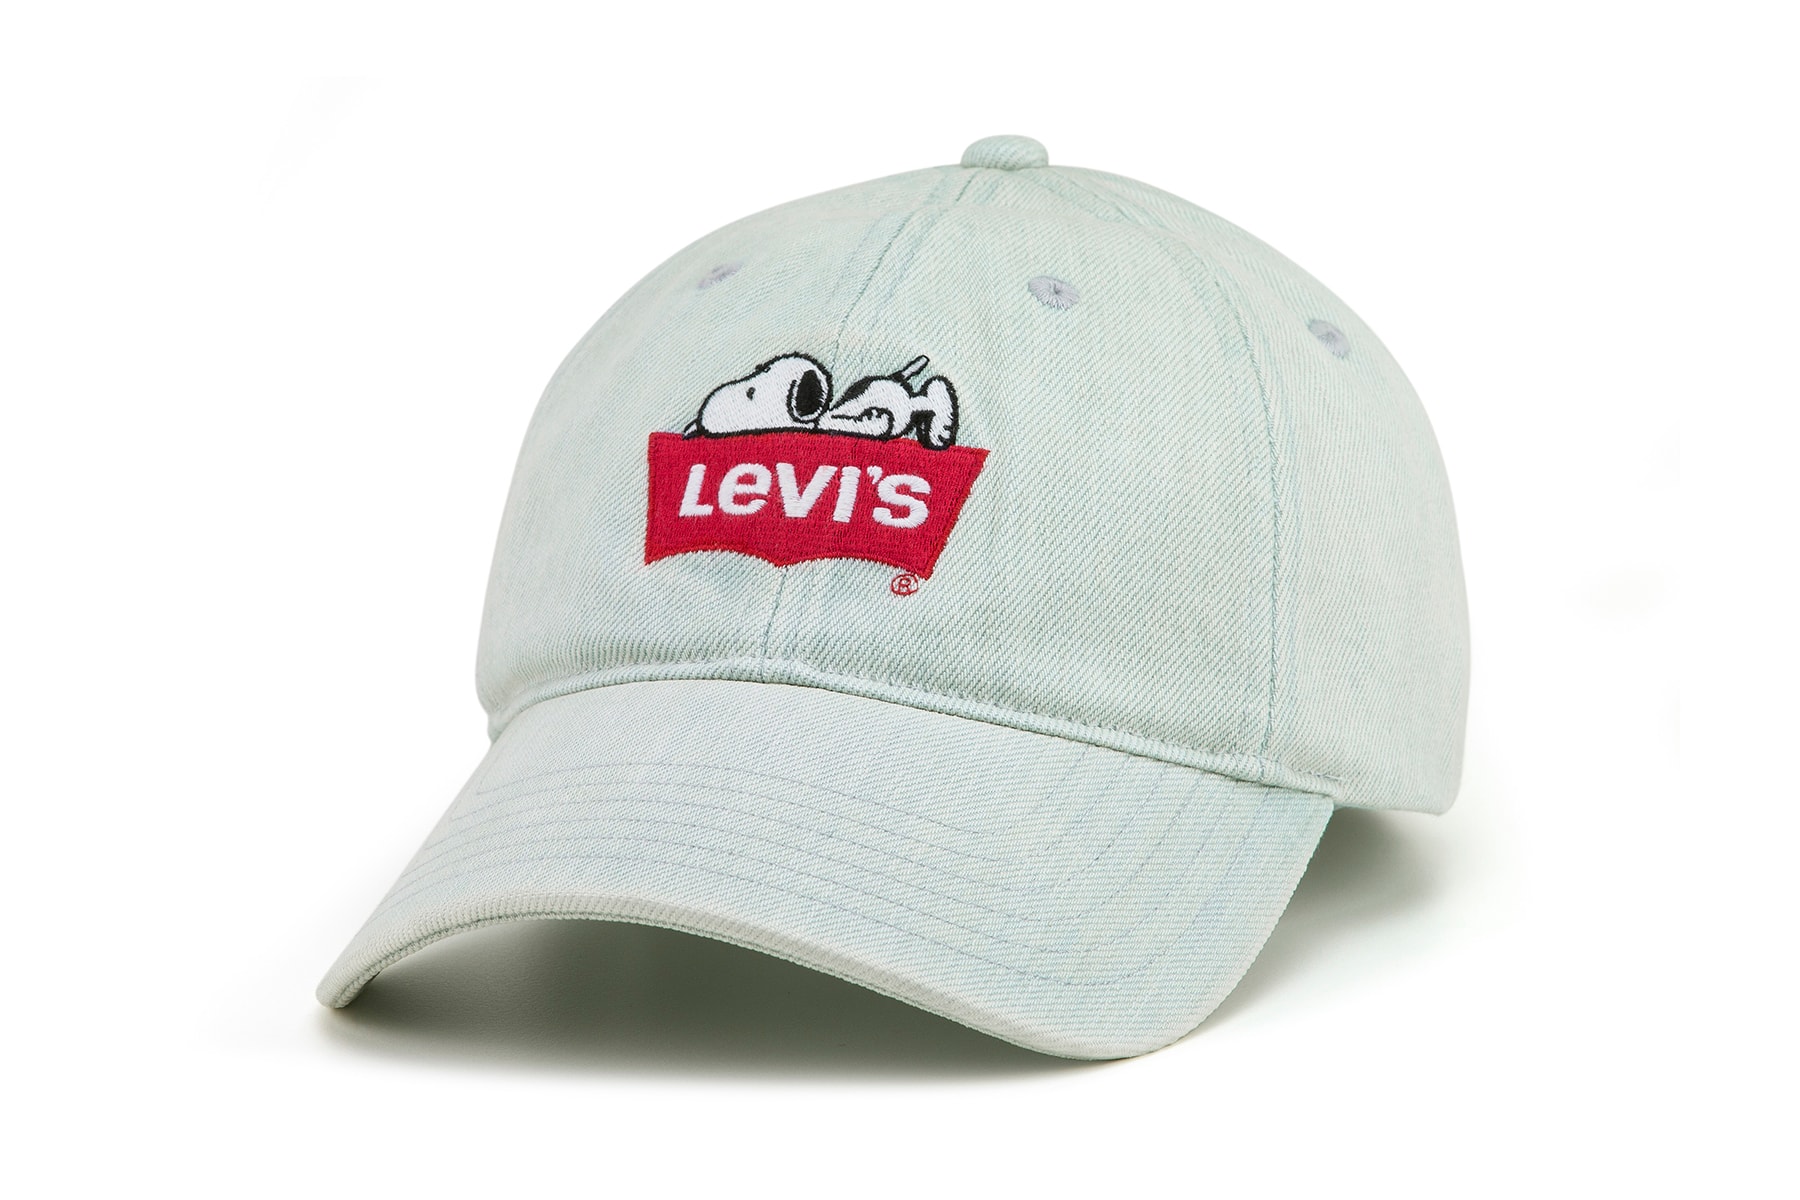 Levis Peanuts Snoopy Year of the Dog Collaboration Denim Cap